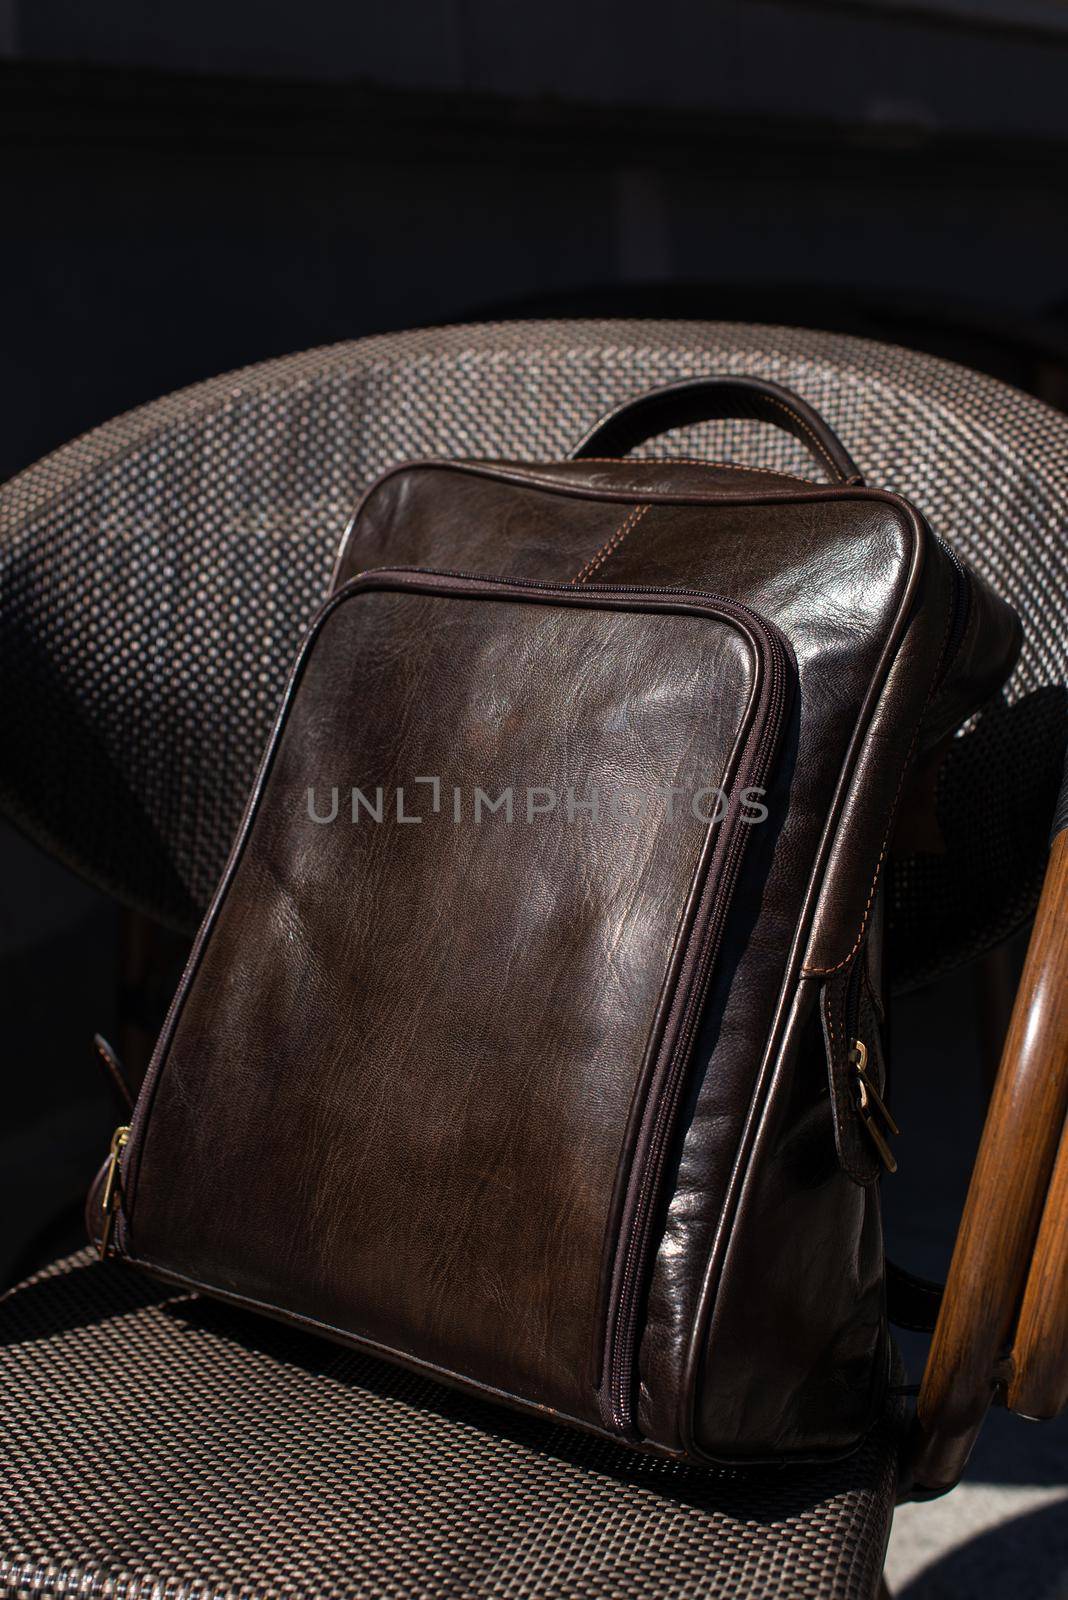 Brown leather backpack on the stylish chair. Outdoor photo